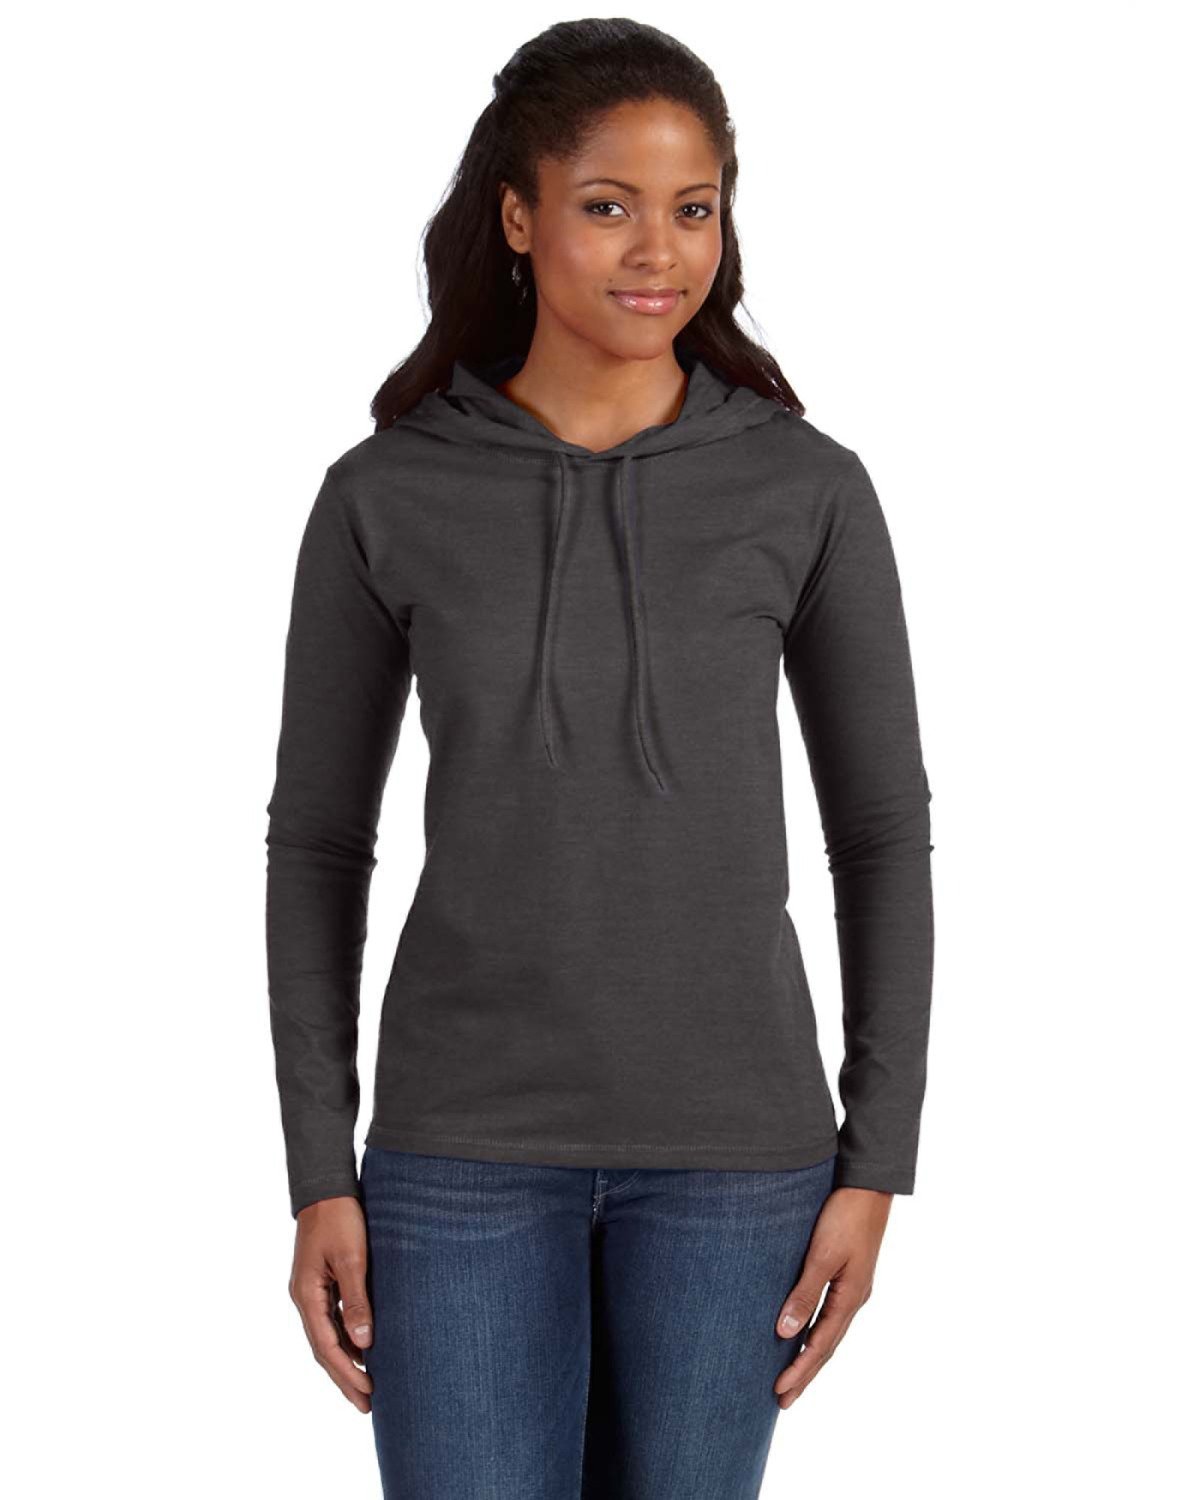 Anvil Ladies' Lightweight Long-Sleeve Hooded T-Shirt HTH DK GY/ DK GY 